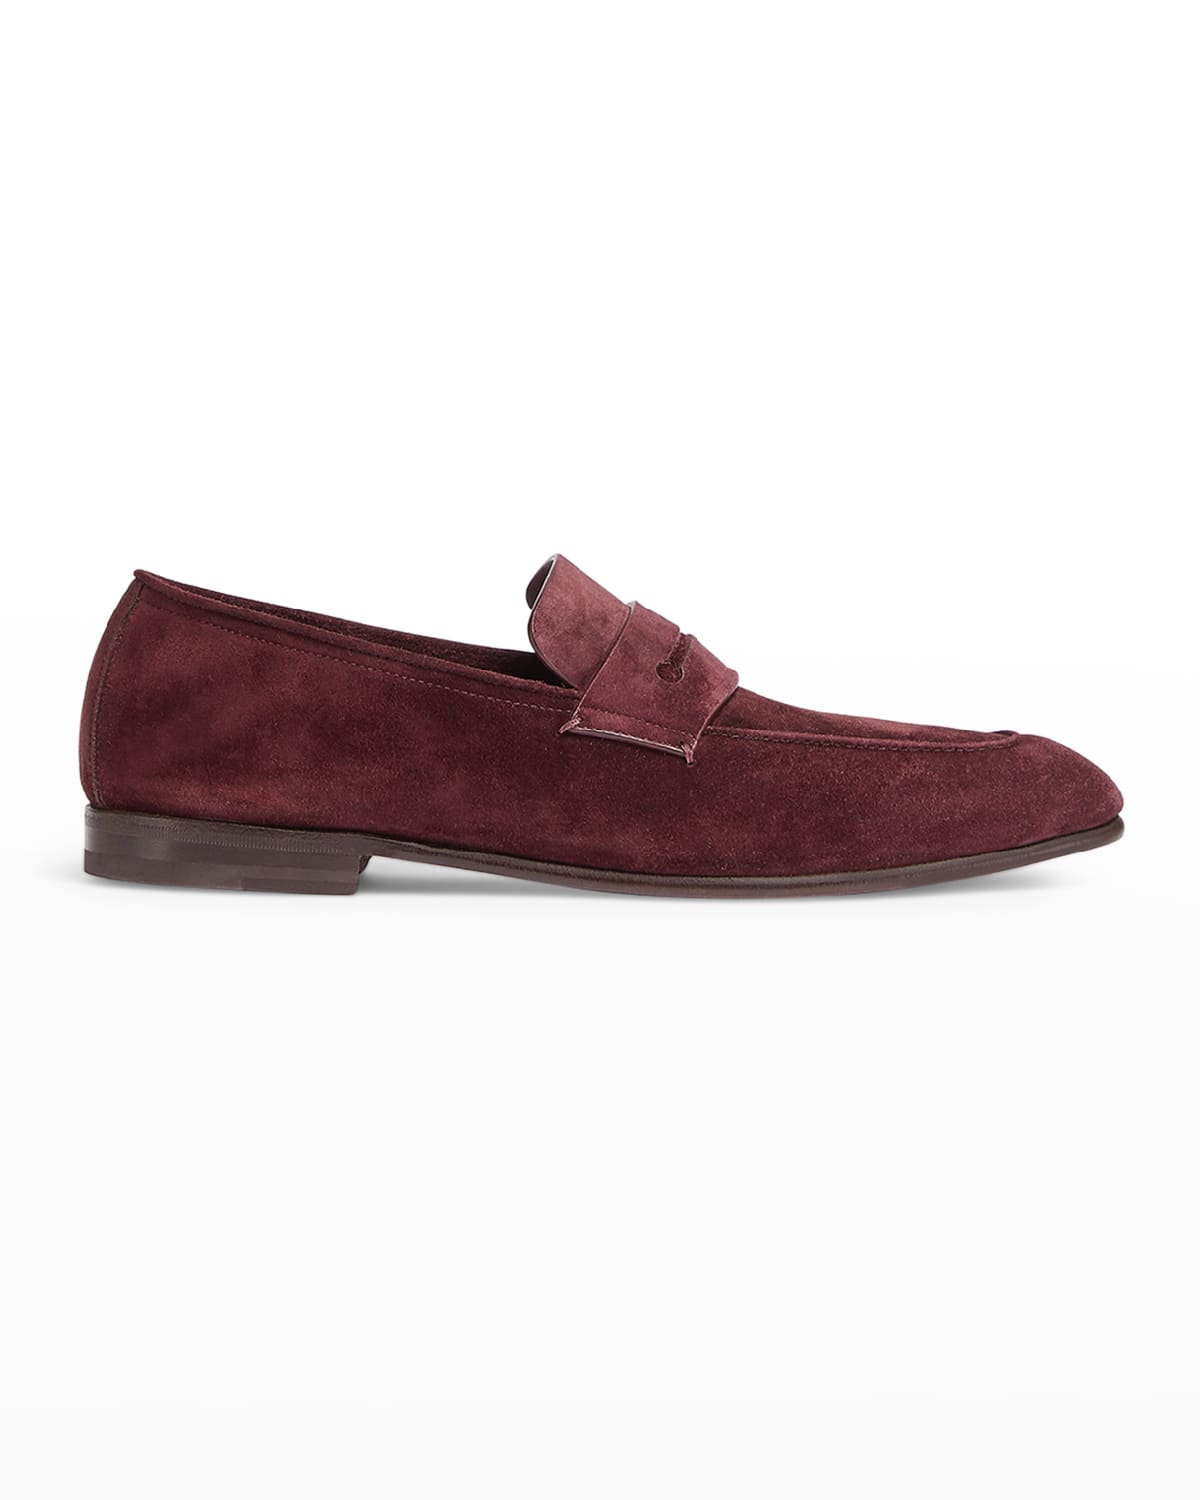 ZEGNA MEN'S LASOLA SUEDE-LEATHER PENNY LOAFERS